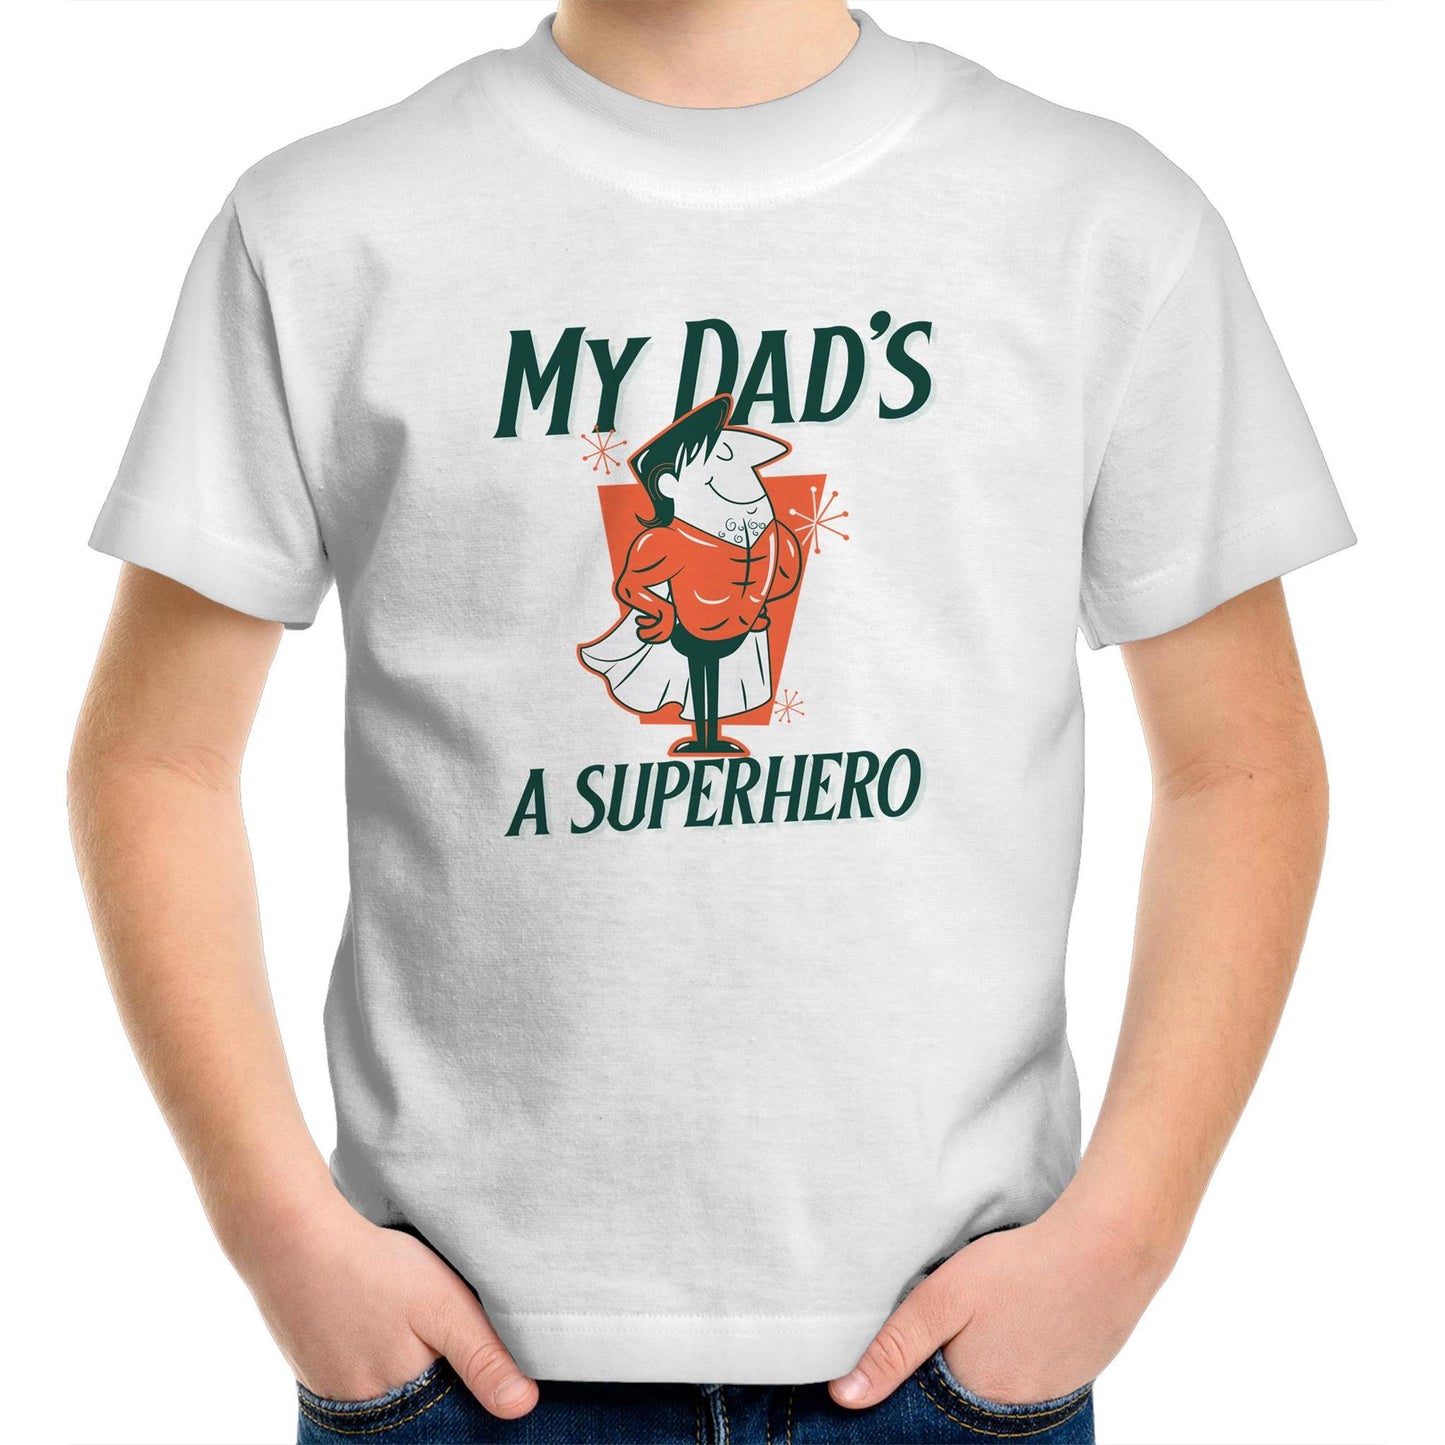 My Dad's A Superhero - Kids Youth Crew T-Shirt White Kids Youth T-shirt Dad